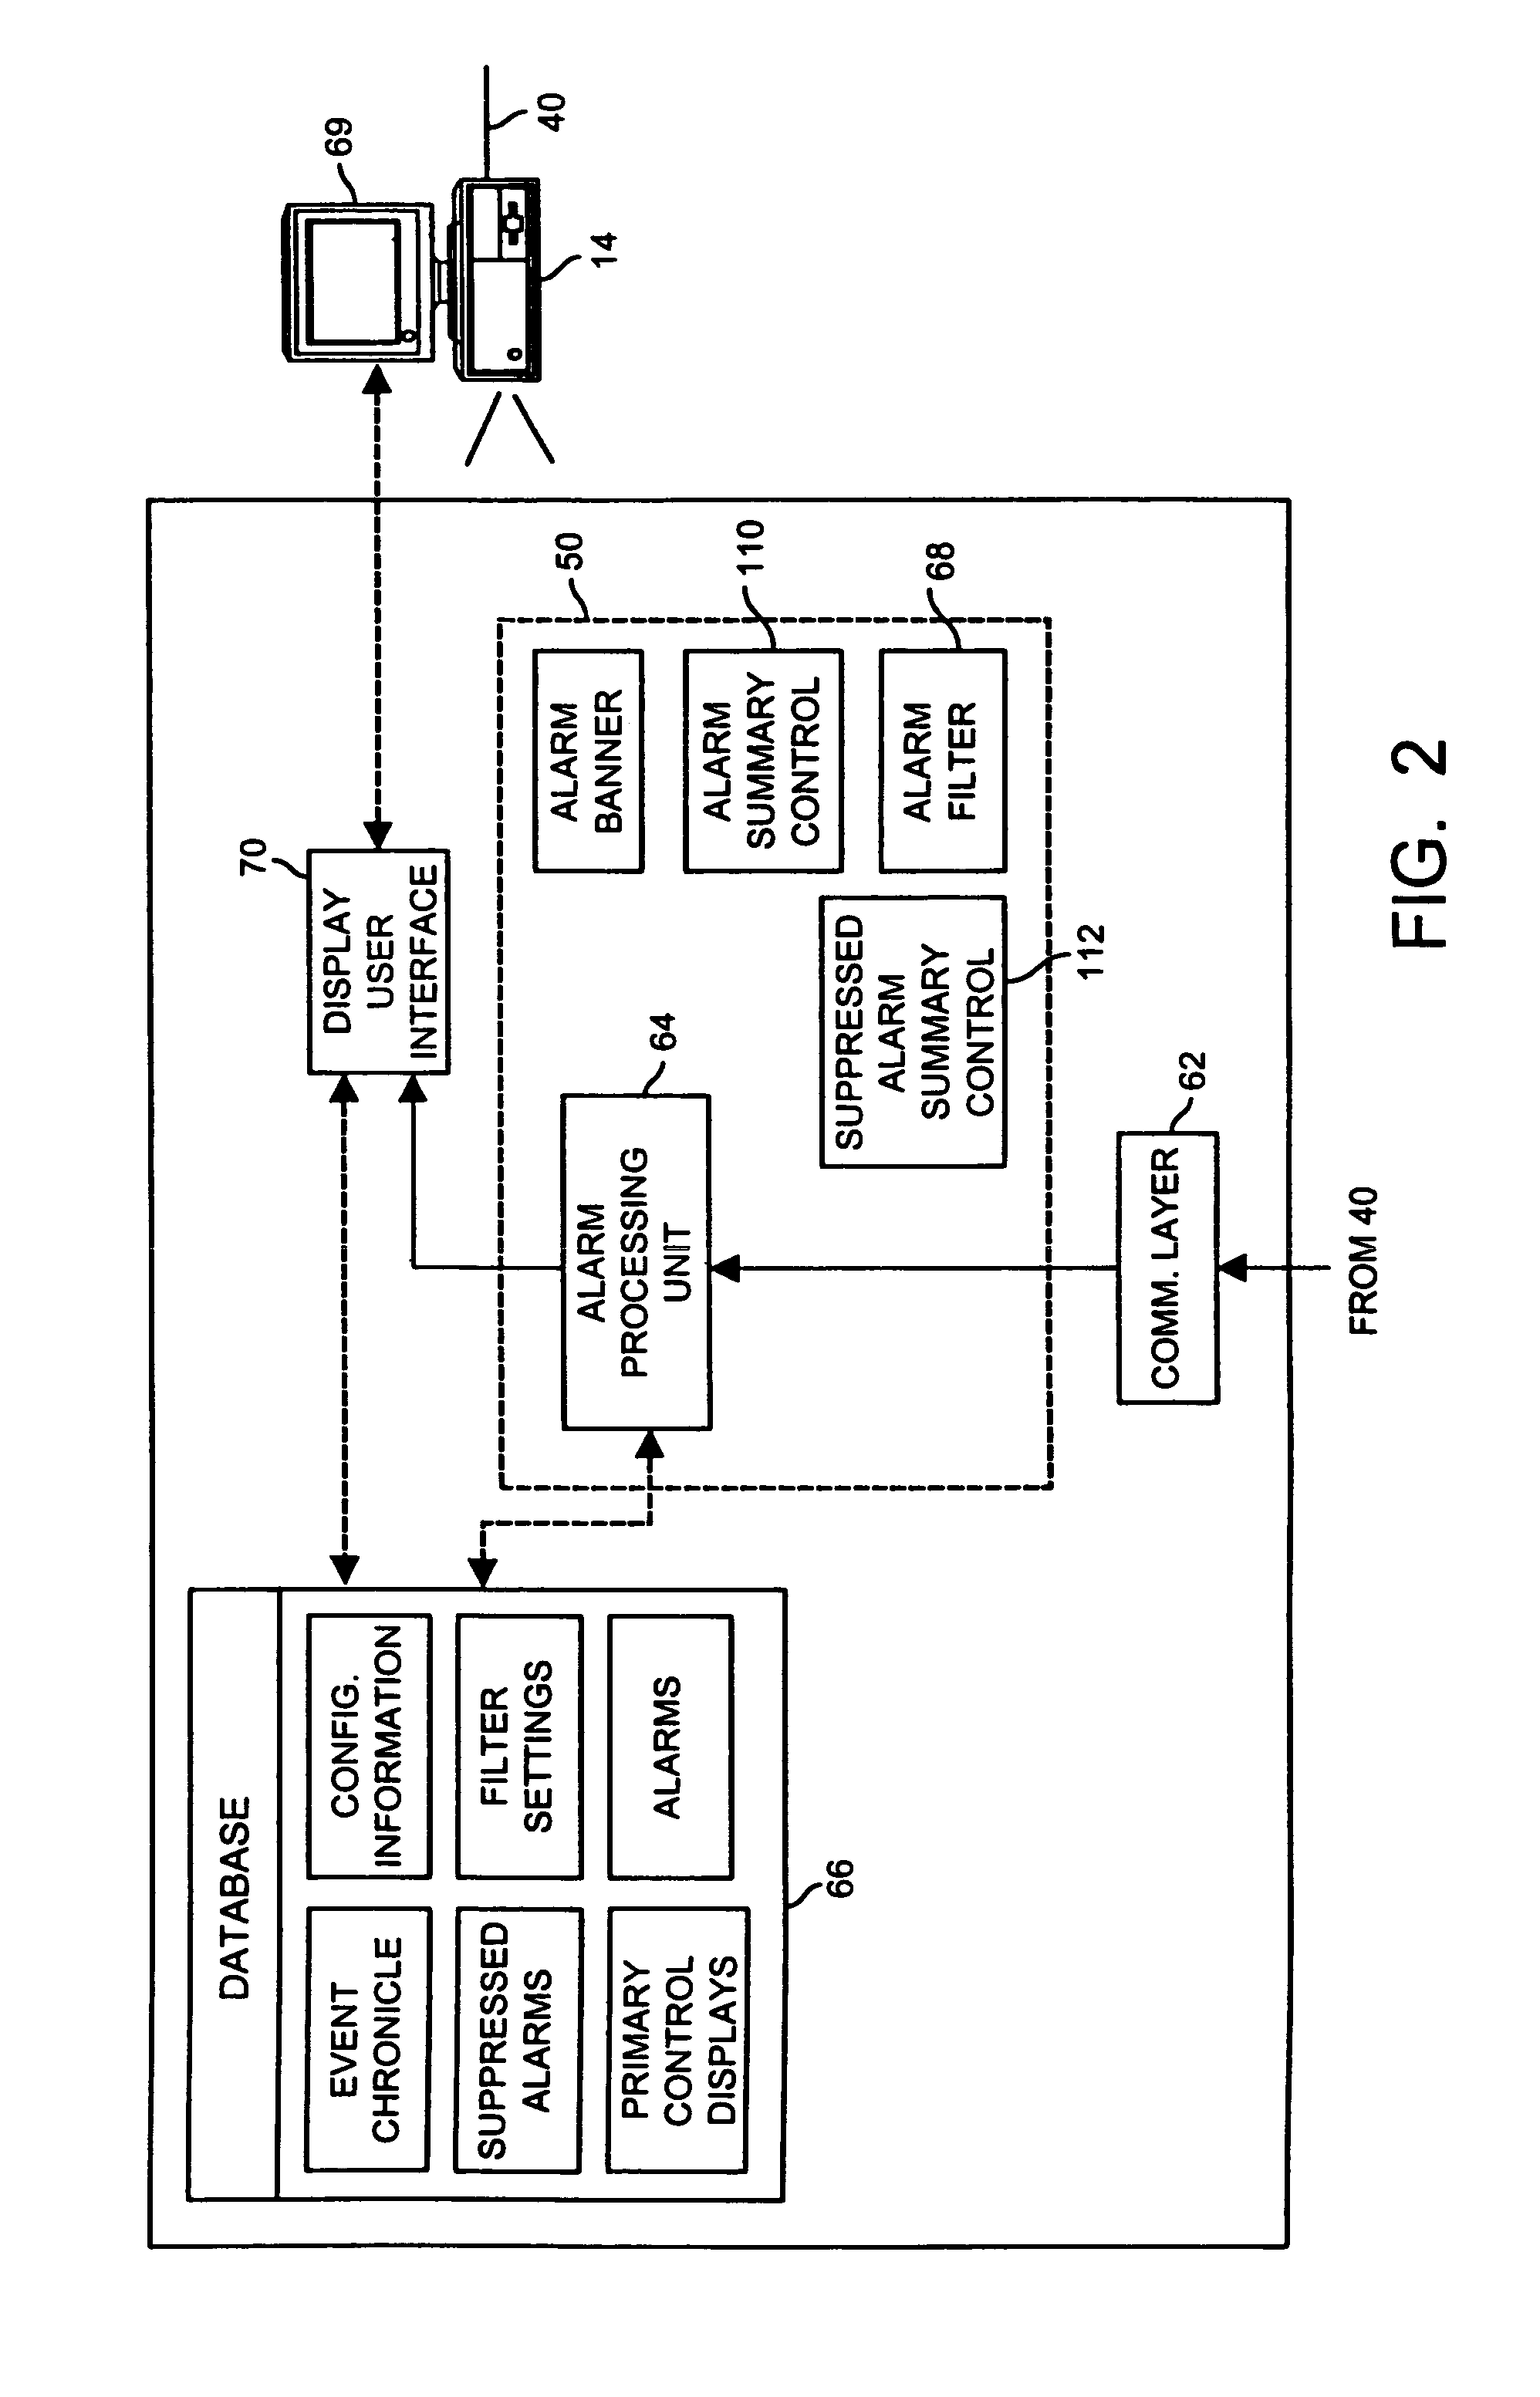 Enhanced device alarms in a process control system